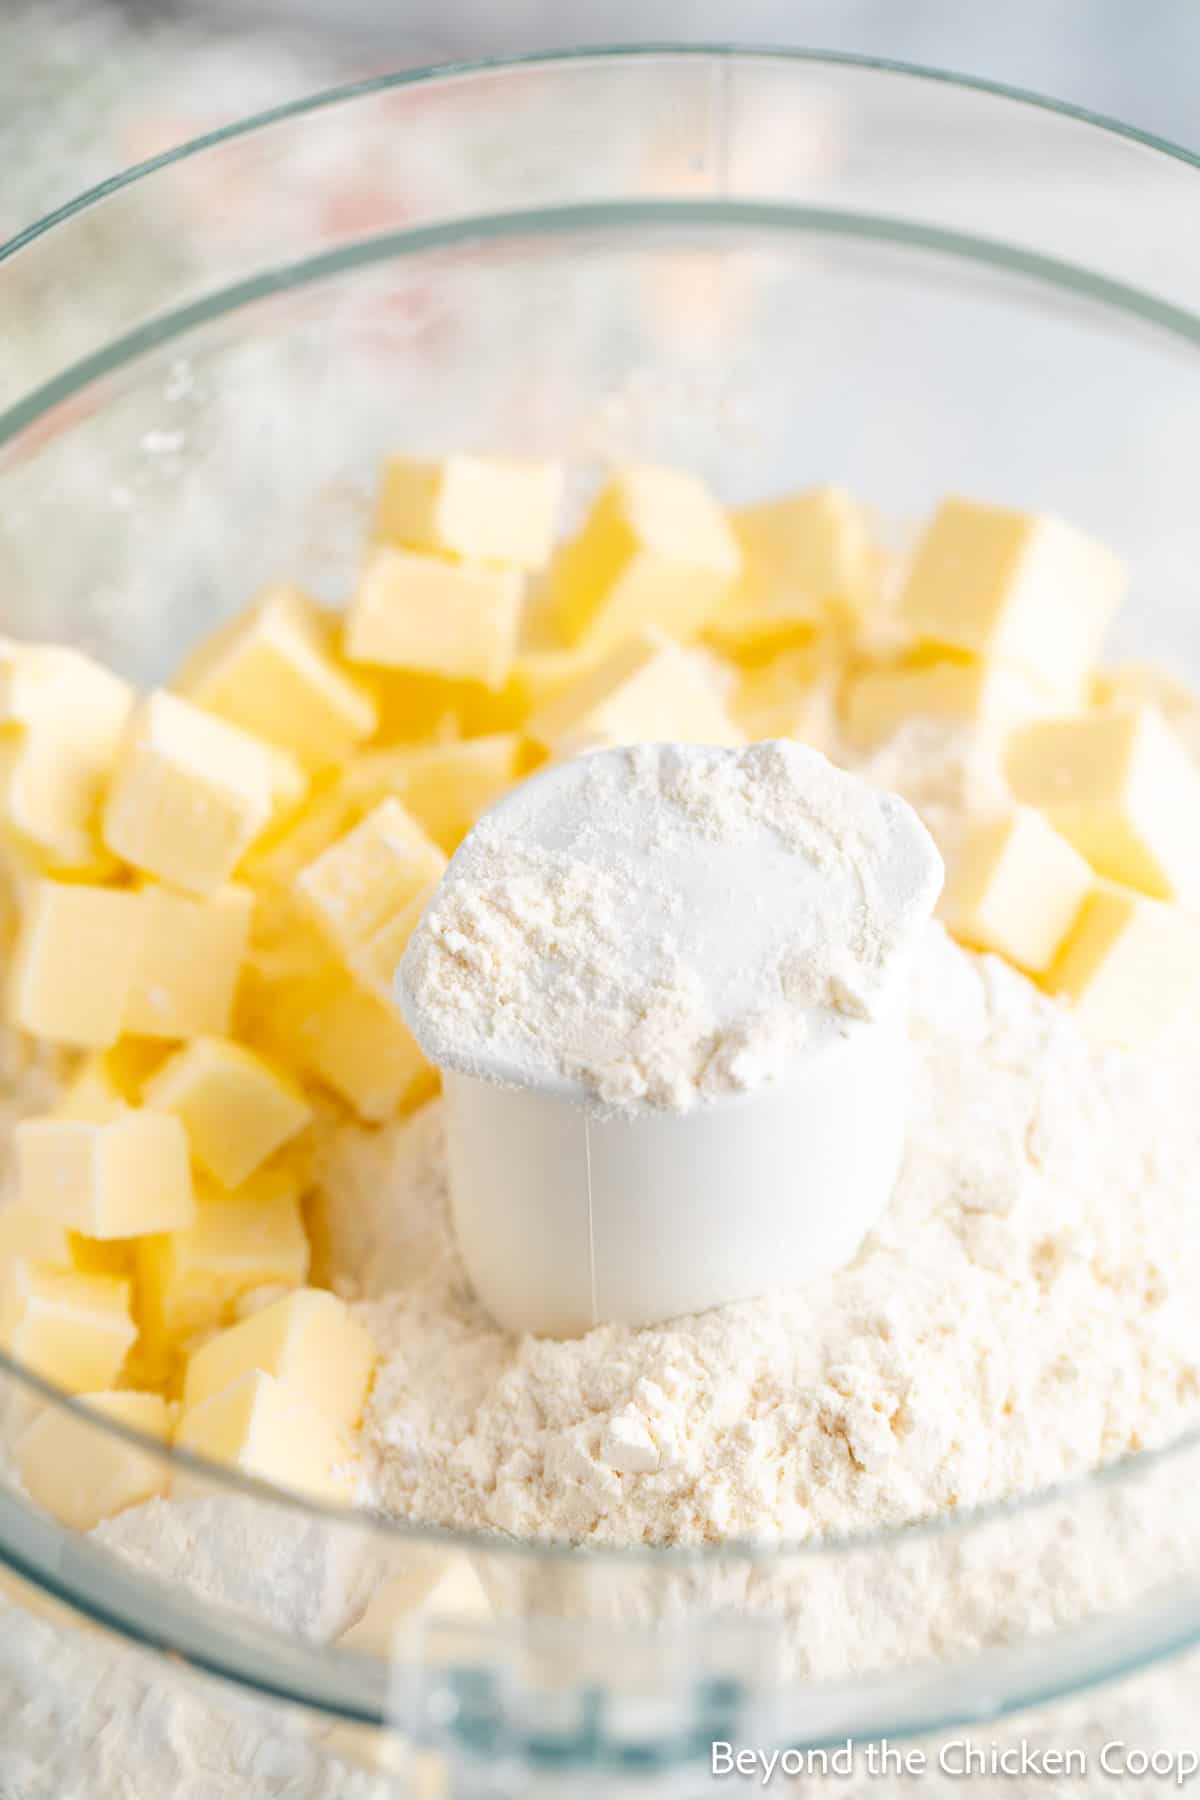 Small cubes of butter and flour in a food processor.